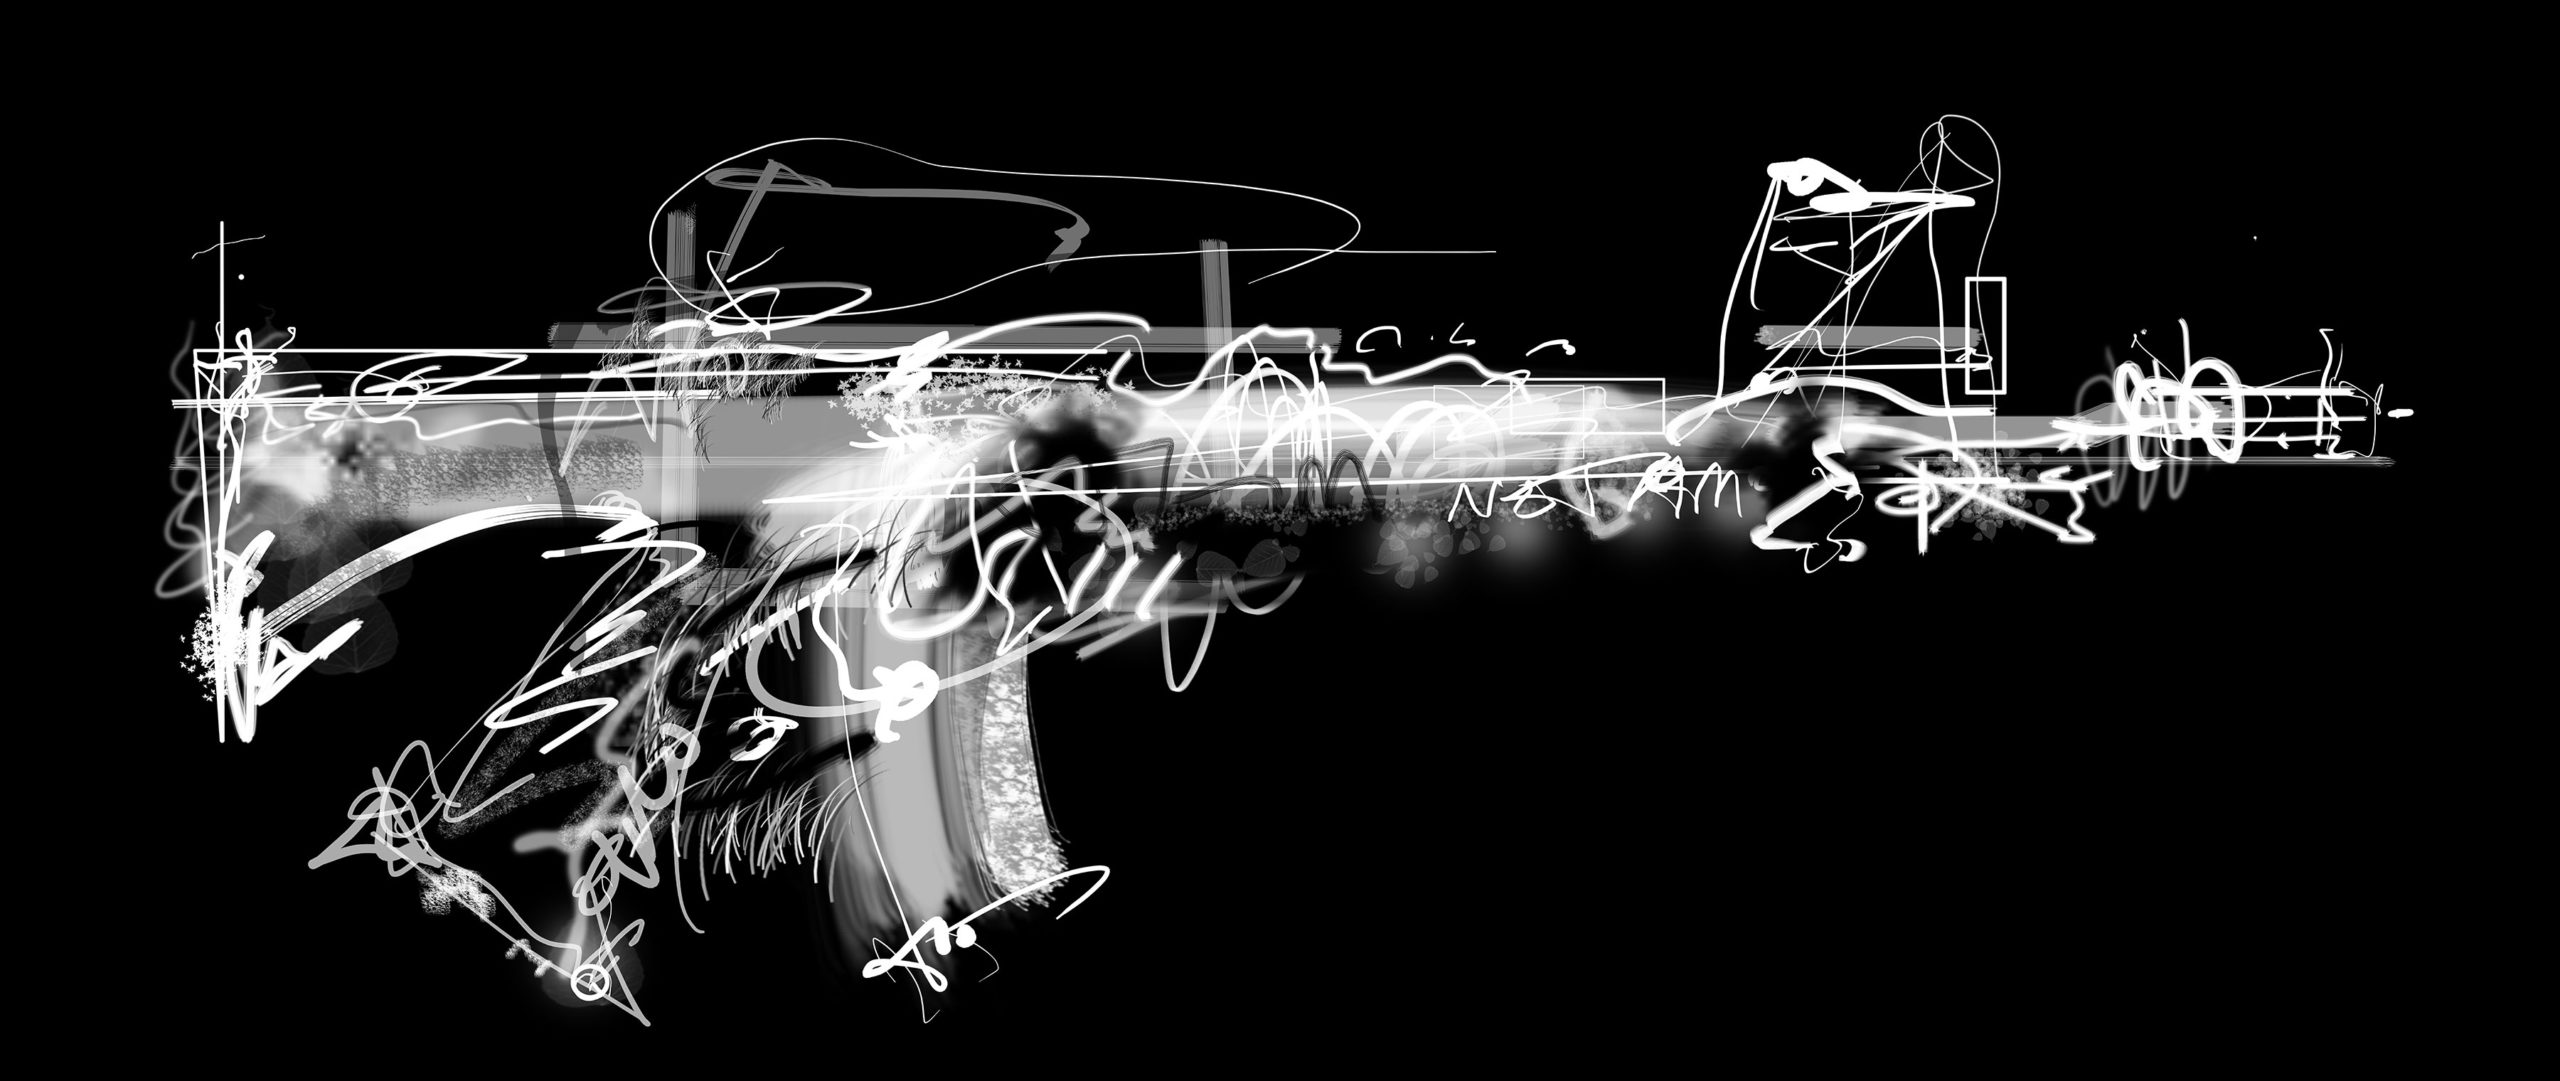 Roz Dimon, KALASHNIKOV II (In solidarity with the people of Ukraine), 2016. 90x38in, archival pigment ink on canvas in black floater frame, $4,500